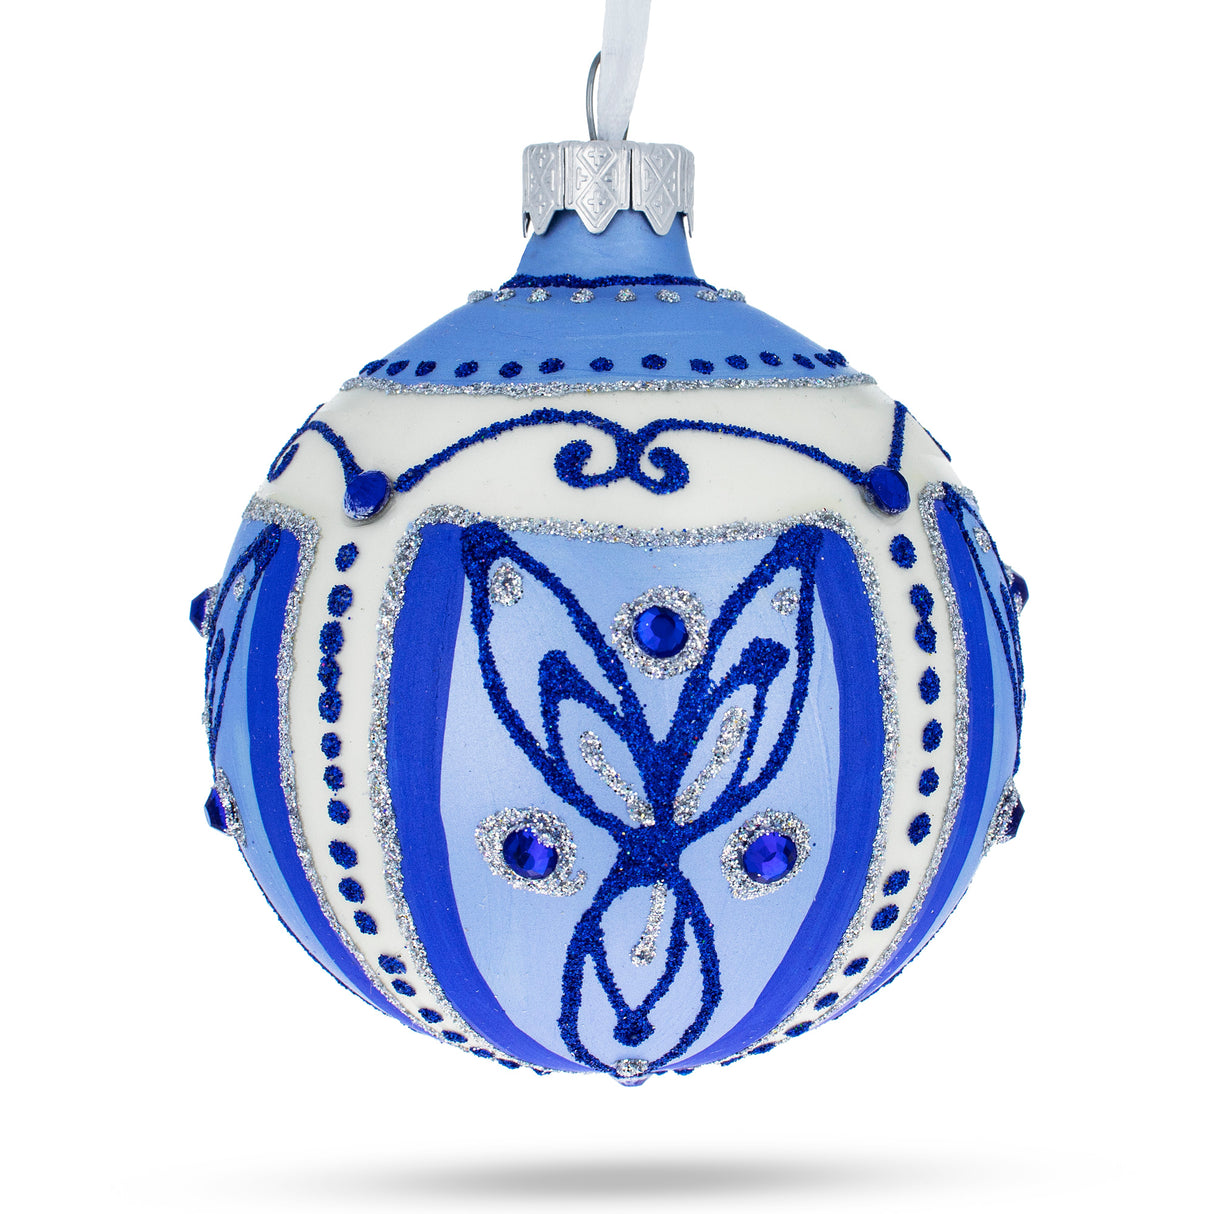 Enchanted Frost: Blue Leaves Blown Glass Ball Christmas Ornament 3.25 Inches in Multi color, Round shape